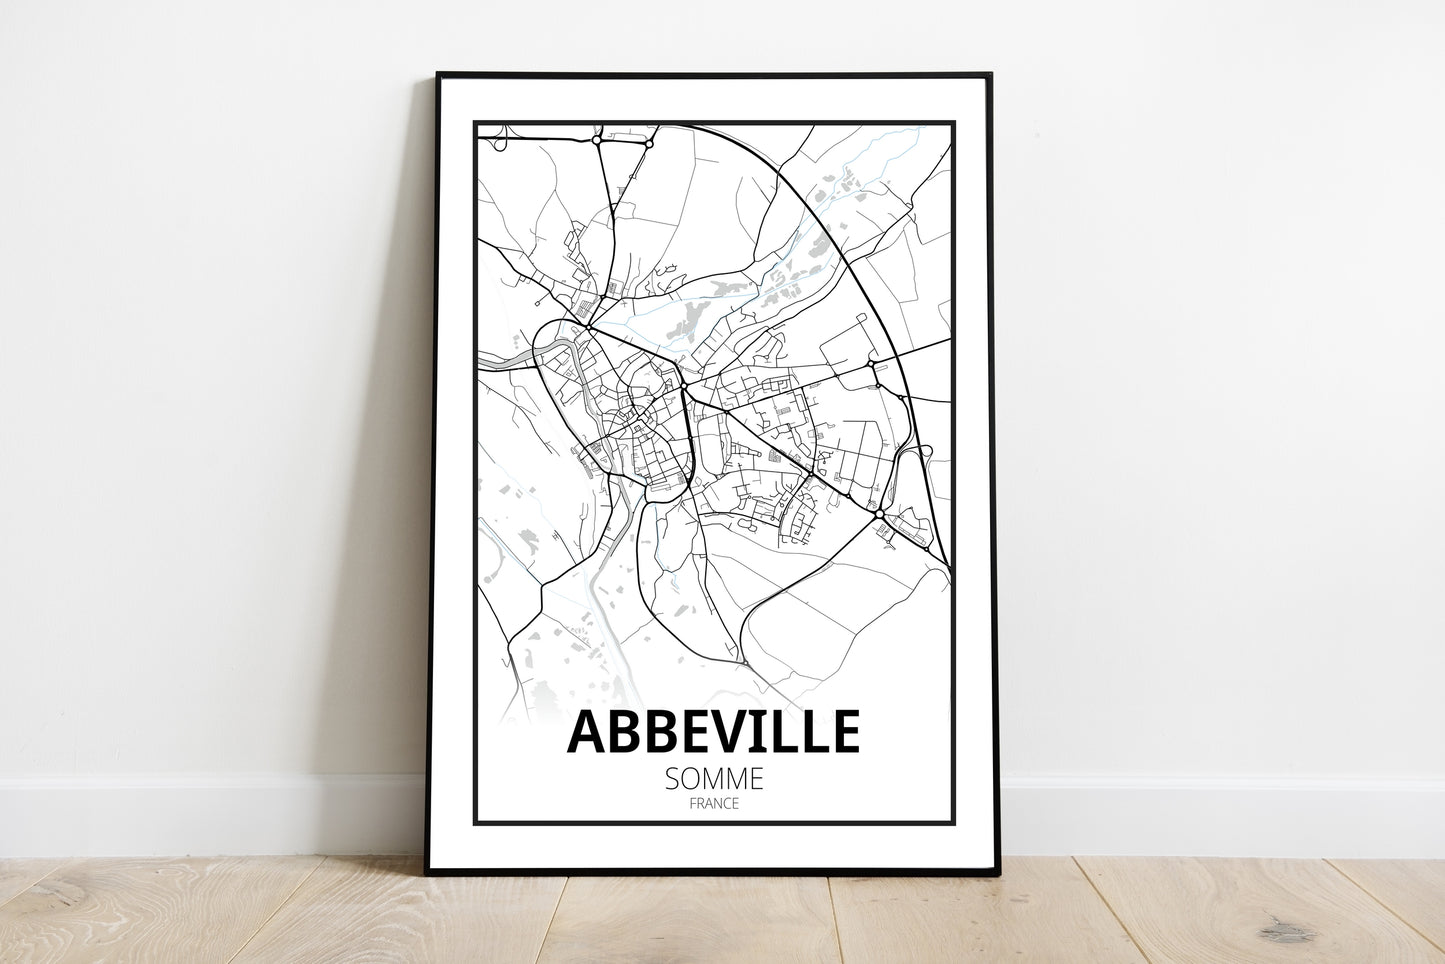 Abbeville - Somme